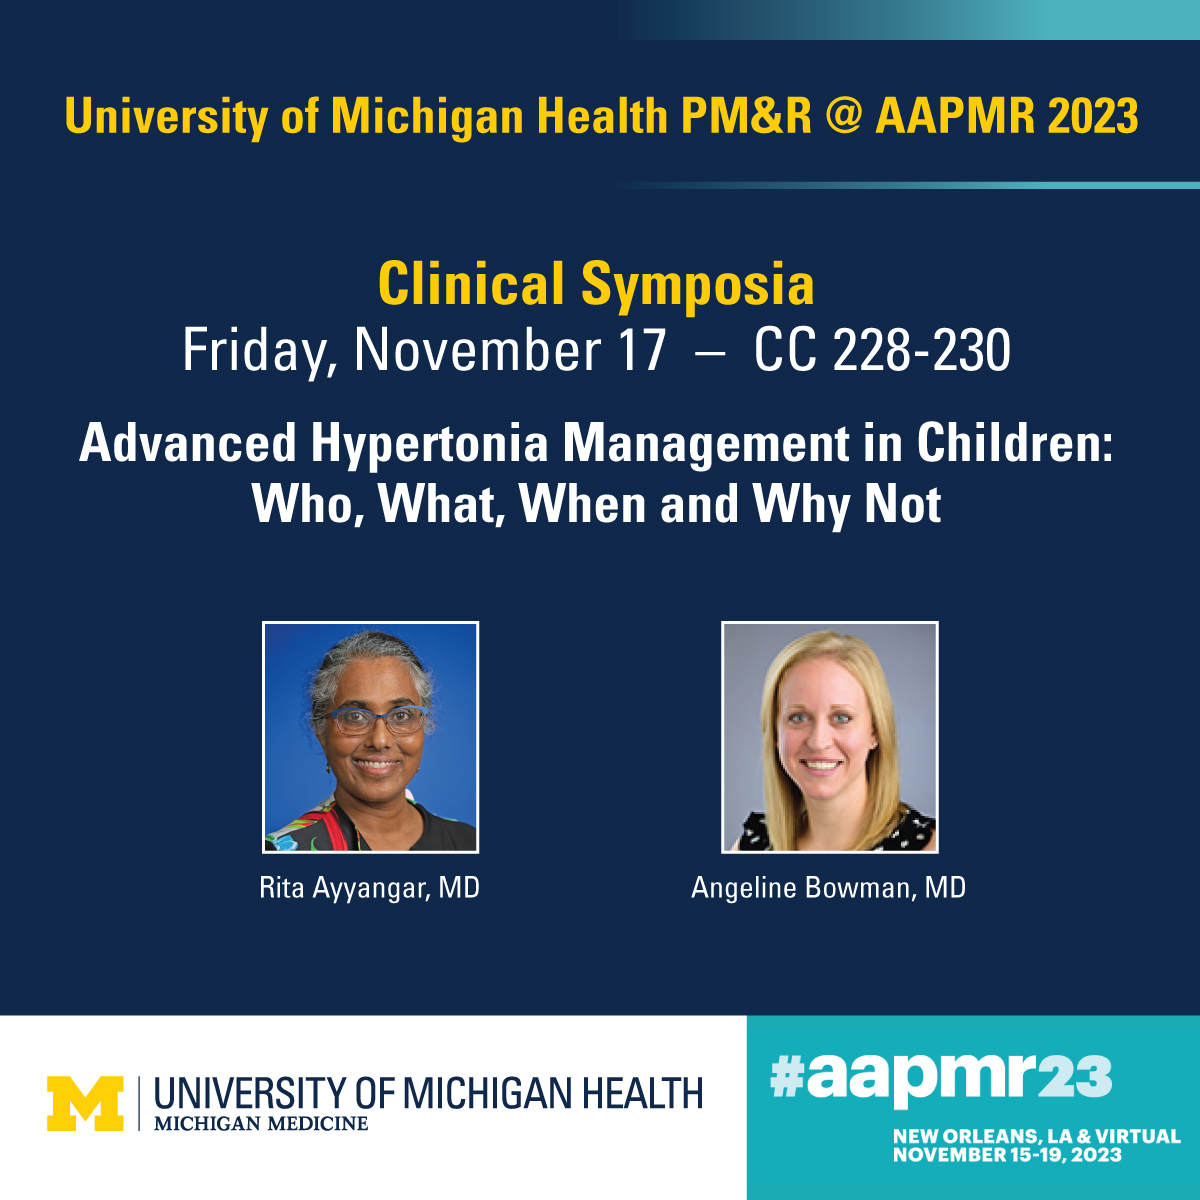 Drs. Rita Ayyangar and Angeline Bowman led a clinical symposia titled "Advanced Hypertonia Management in Children: Who, What, When, and Why Not" 